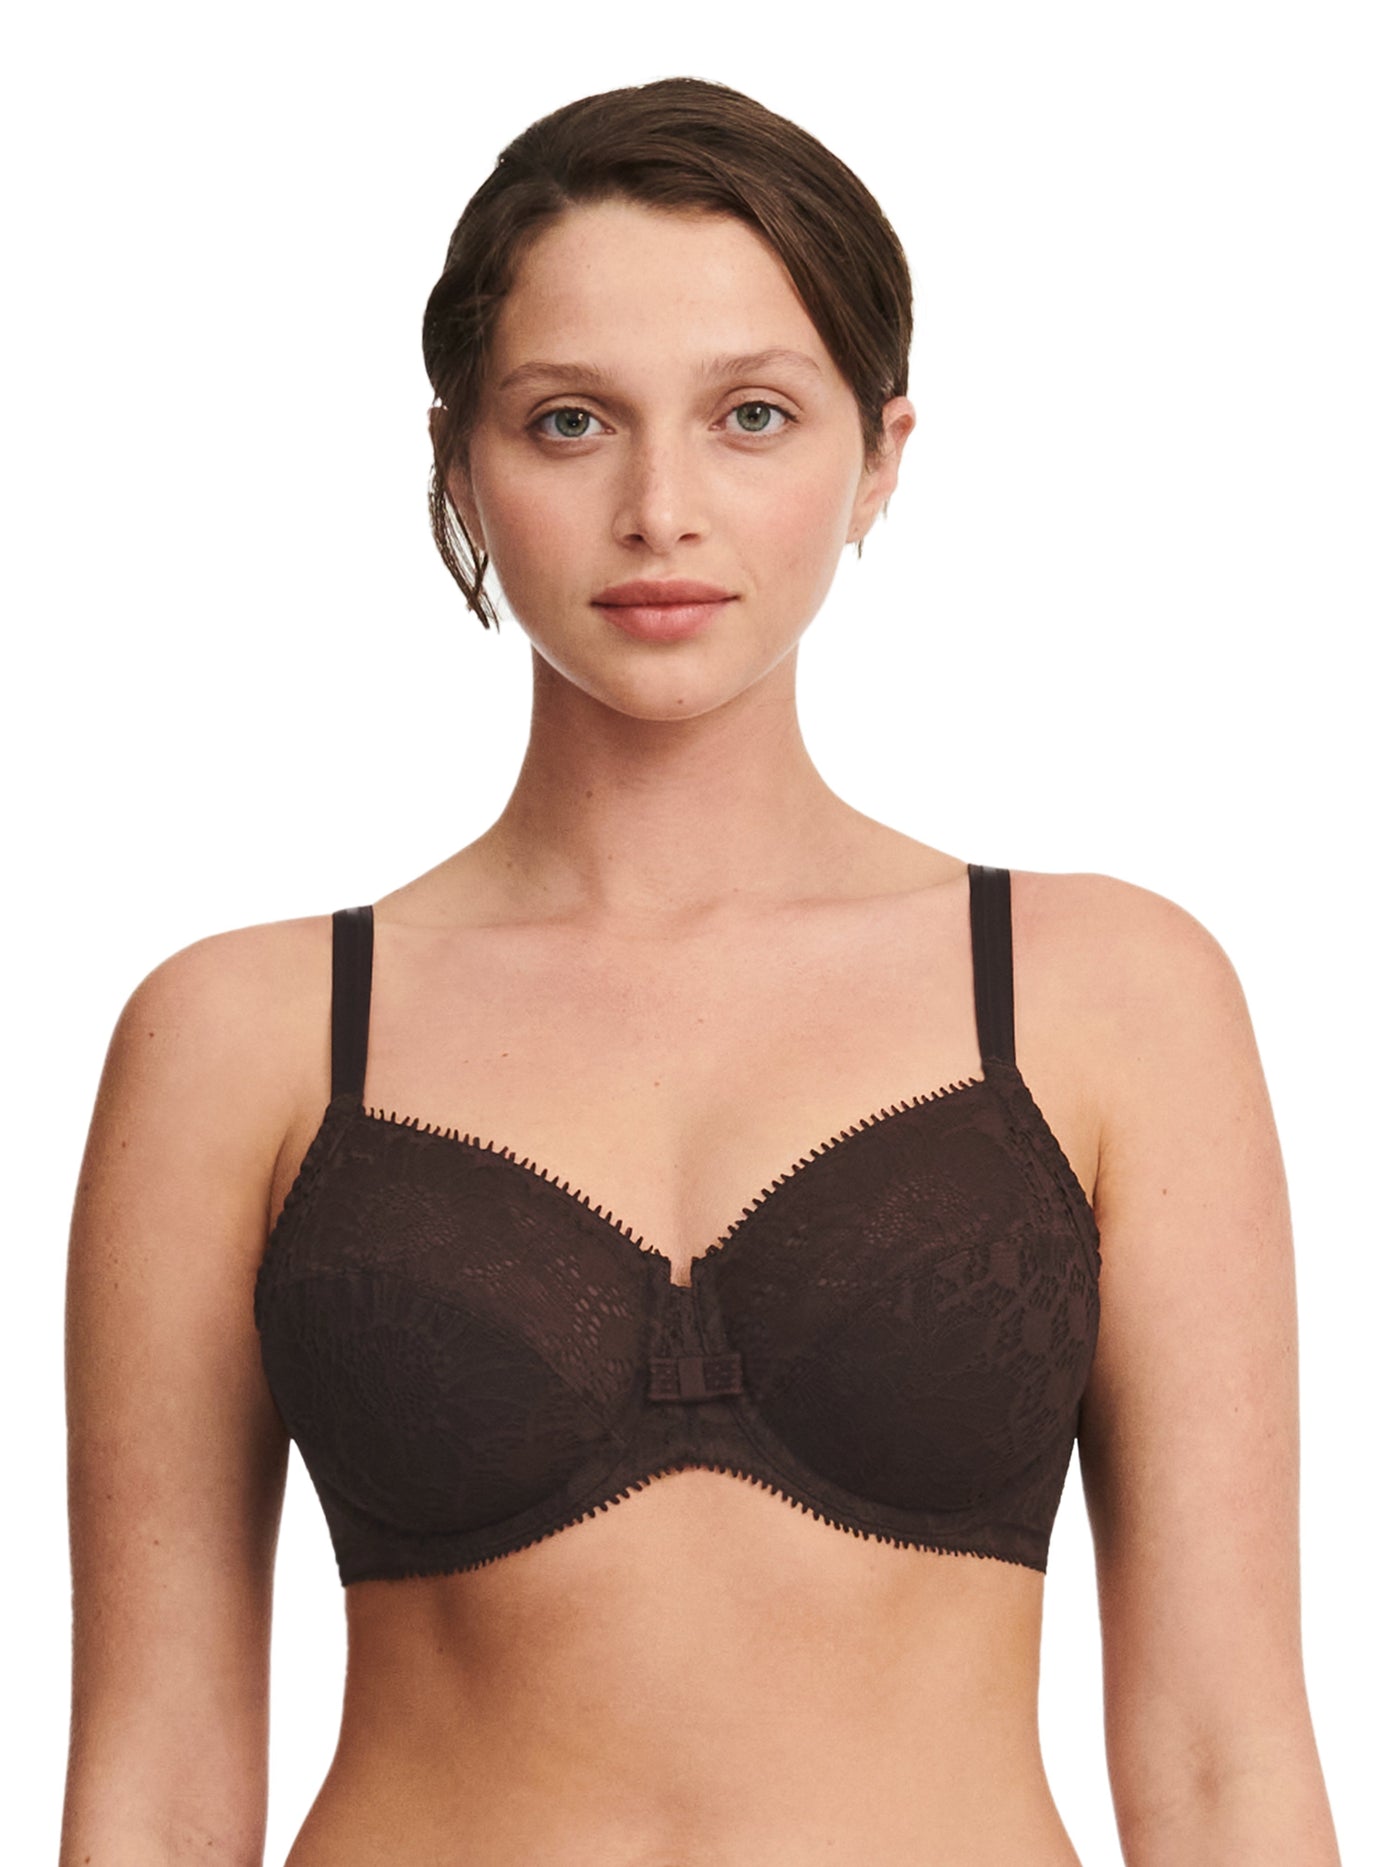 Chantelle - Day To Night Very Covering Underwired Bra Brown Full Cup Bra Chantelle 